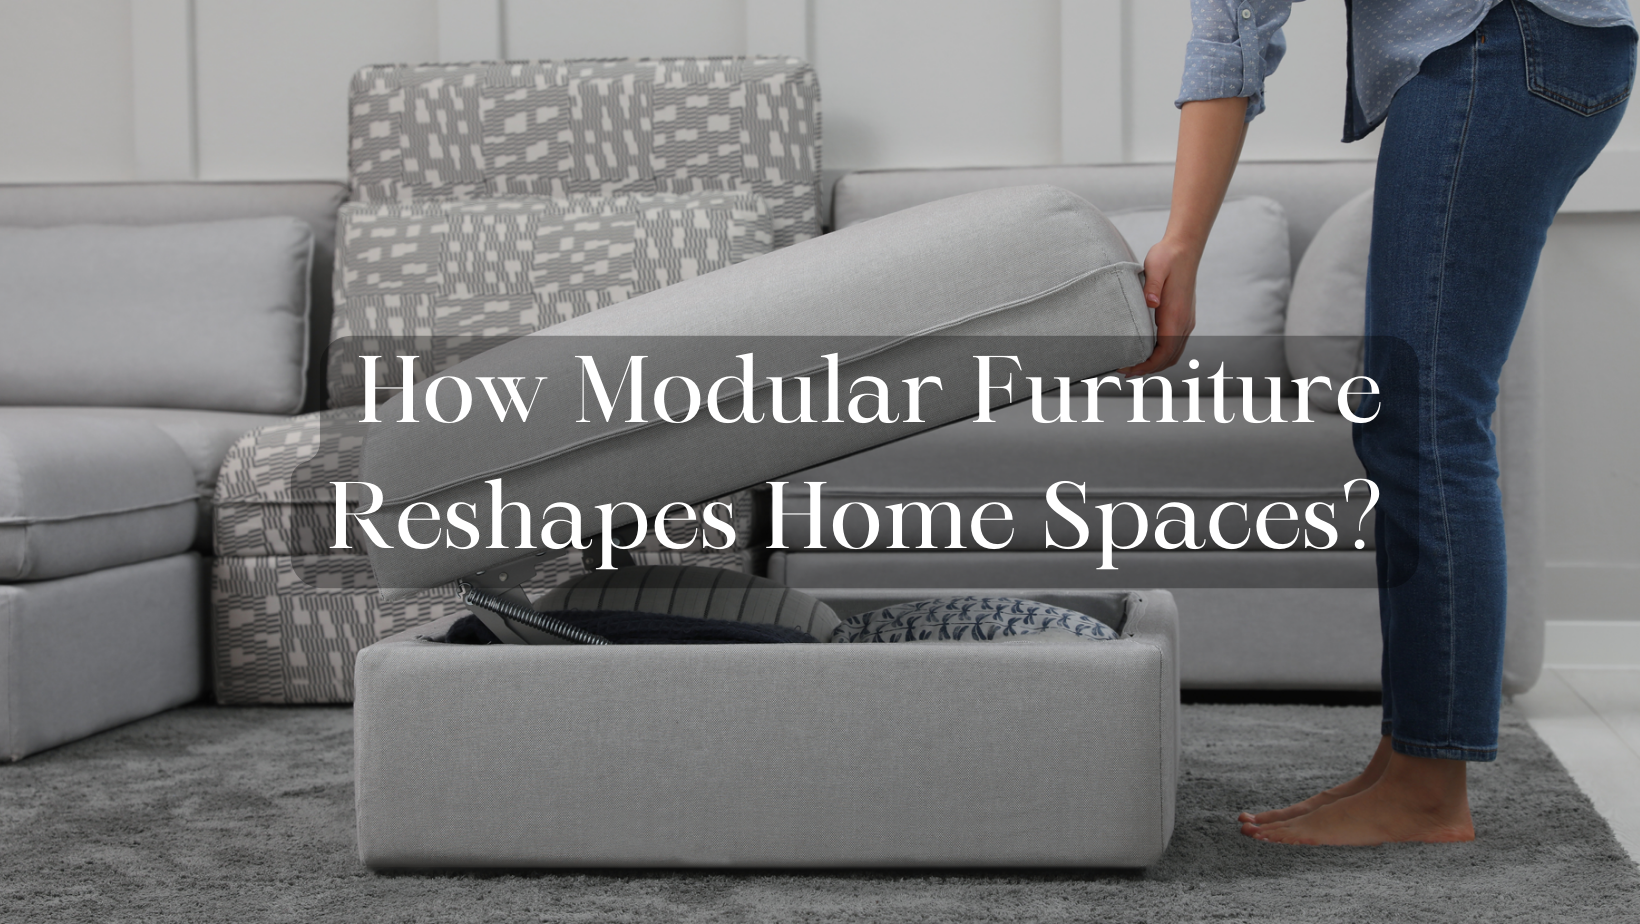 How Modular Furniture Reshapes Home Spaces?